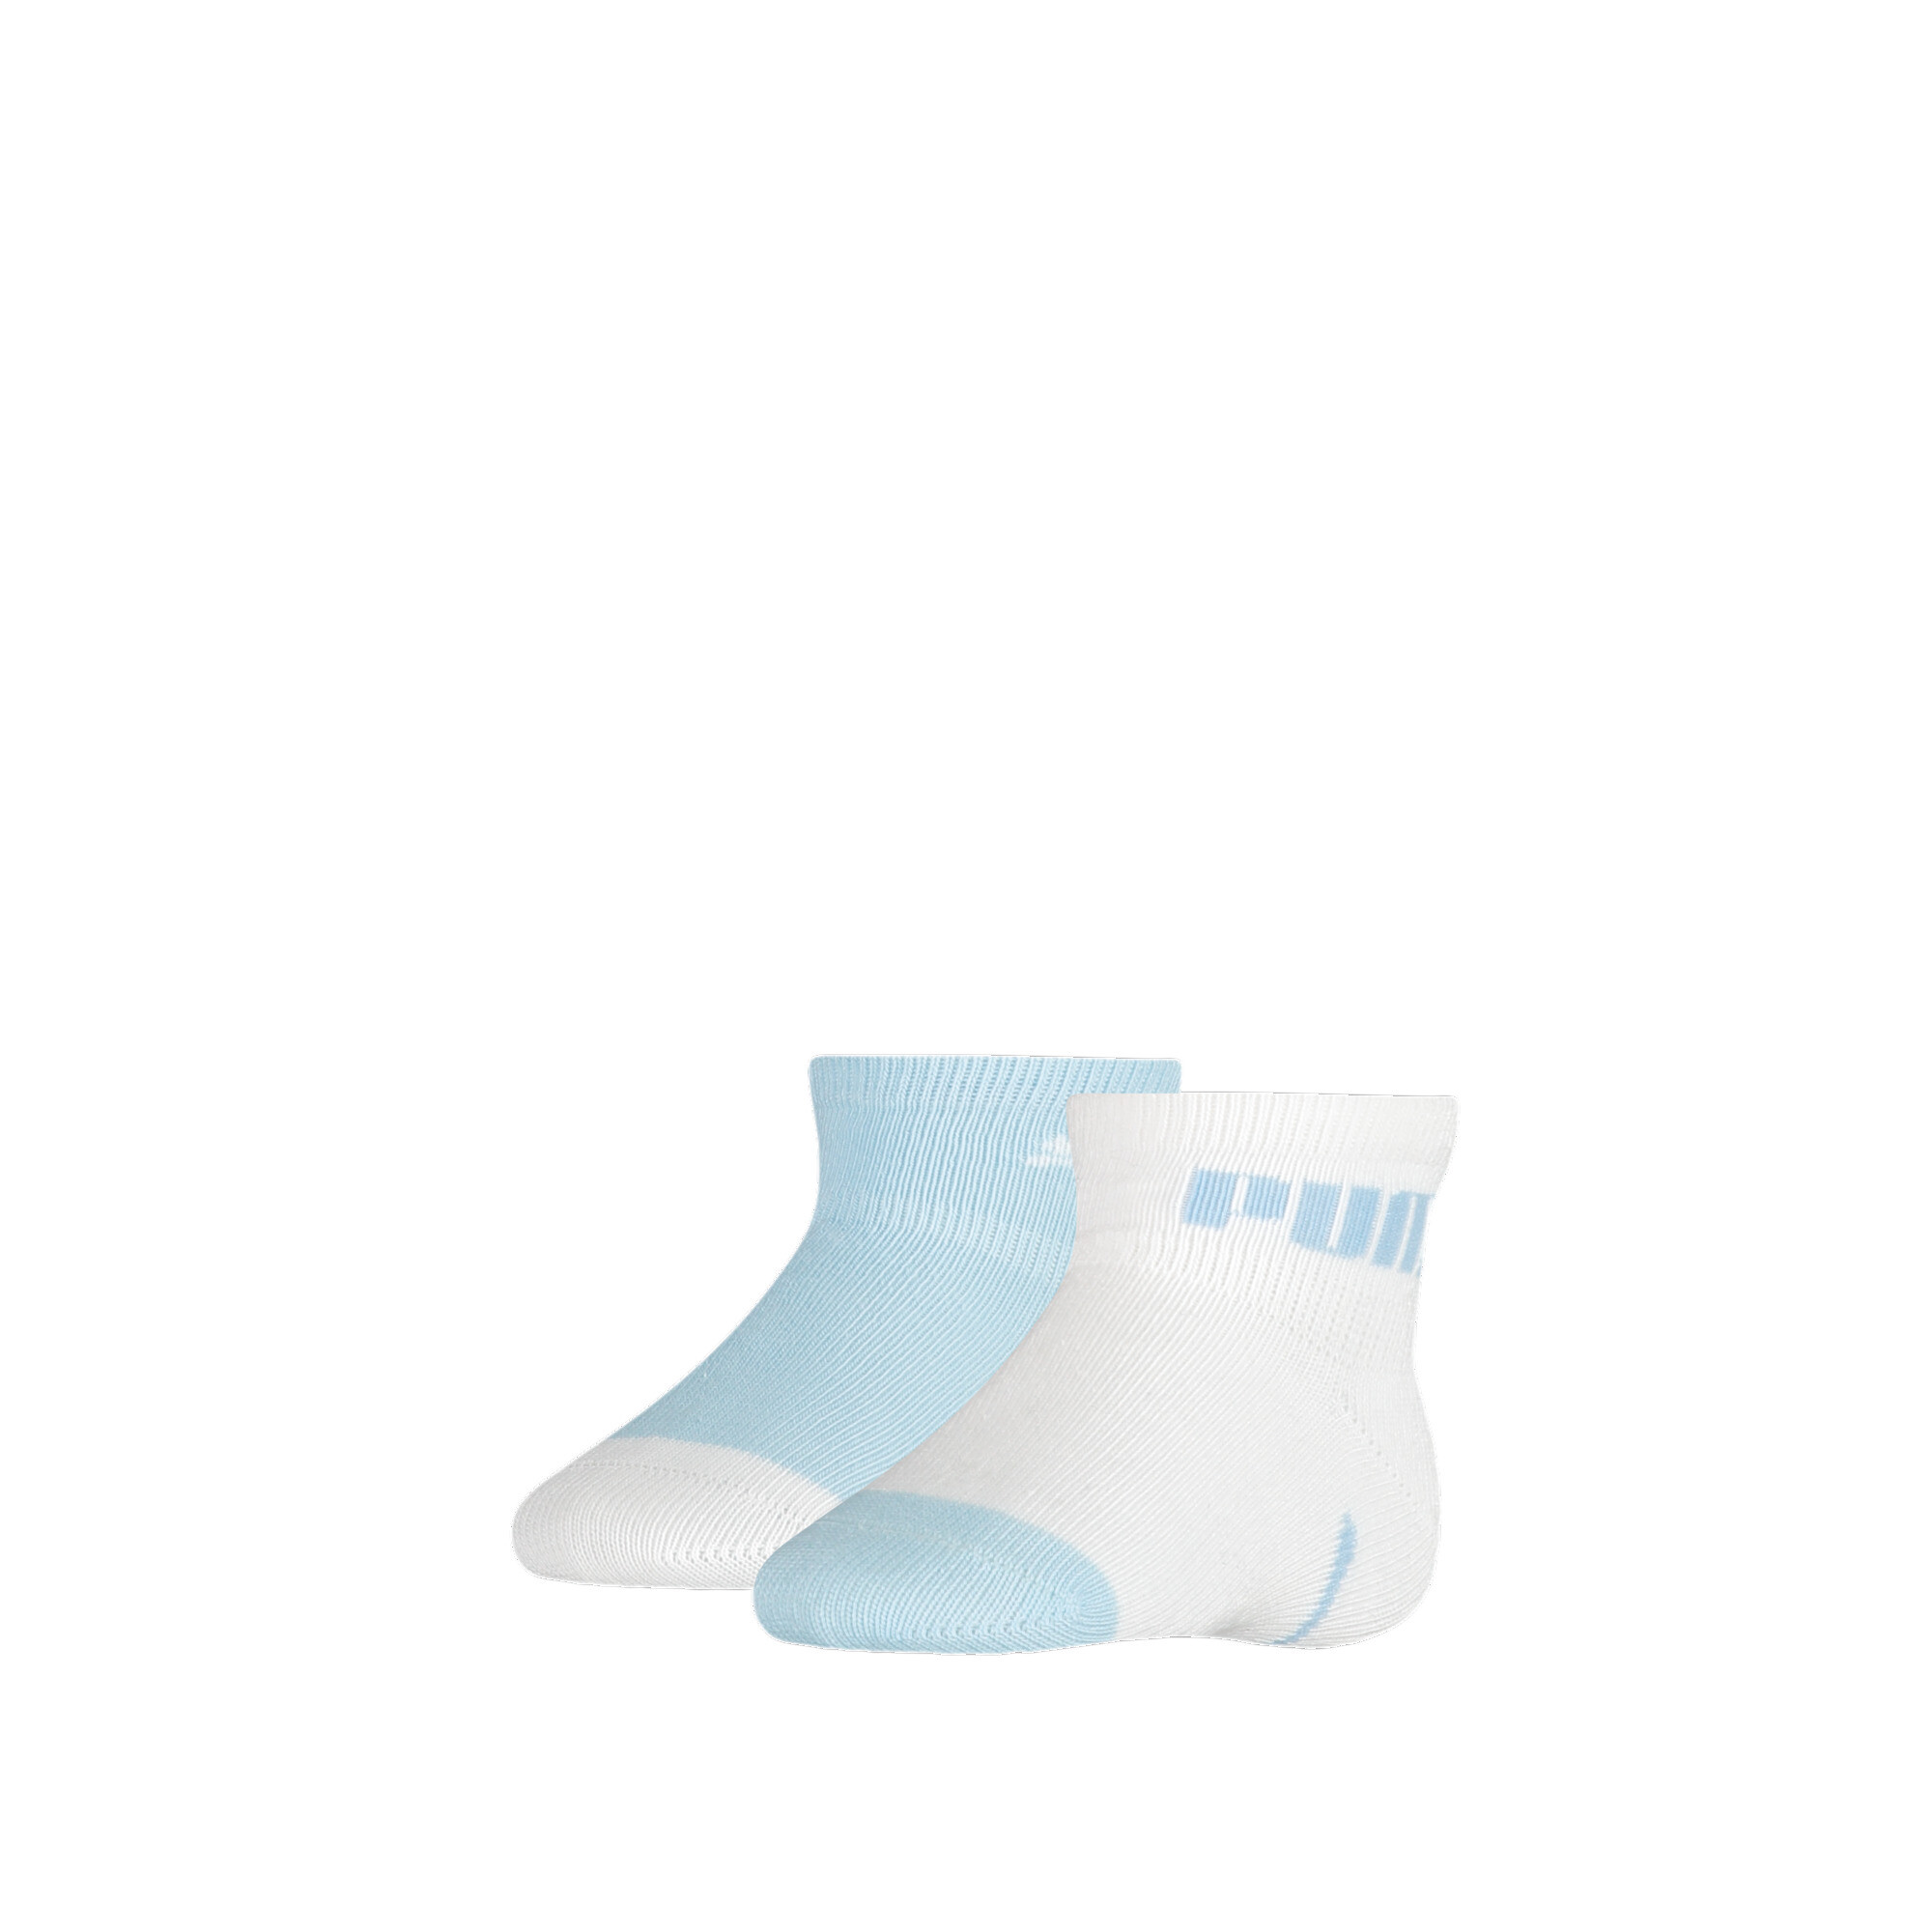 Kids' PUMA Baby Mini Cats Lifestyle Socks 2 Pack In Blue, Size 15-18